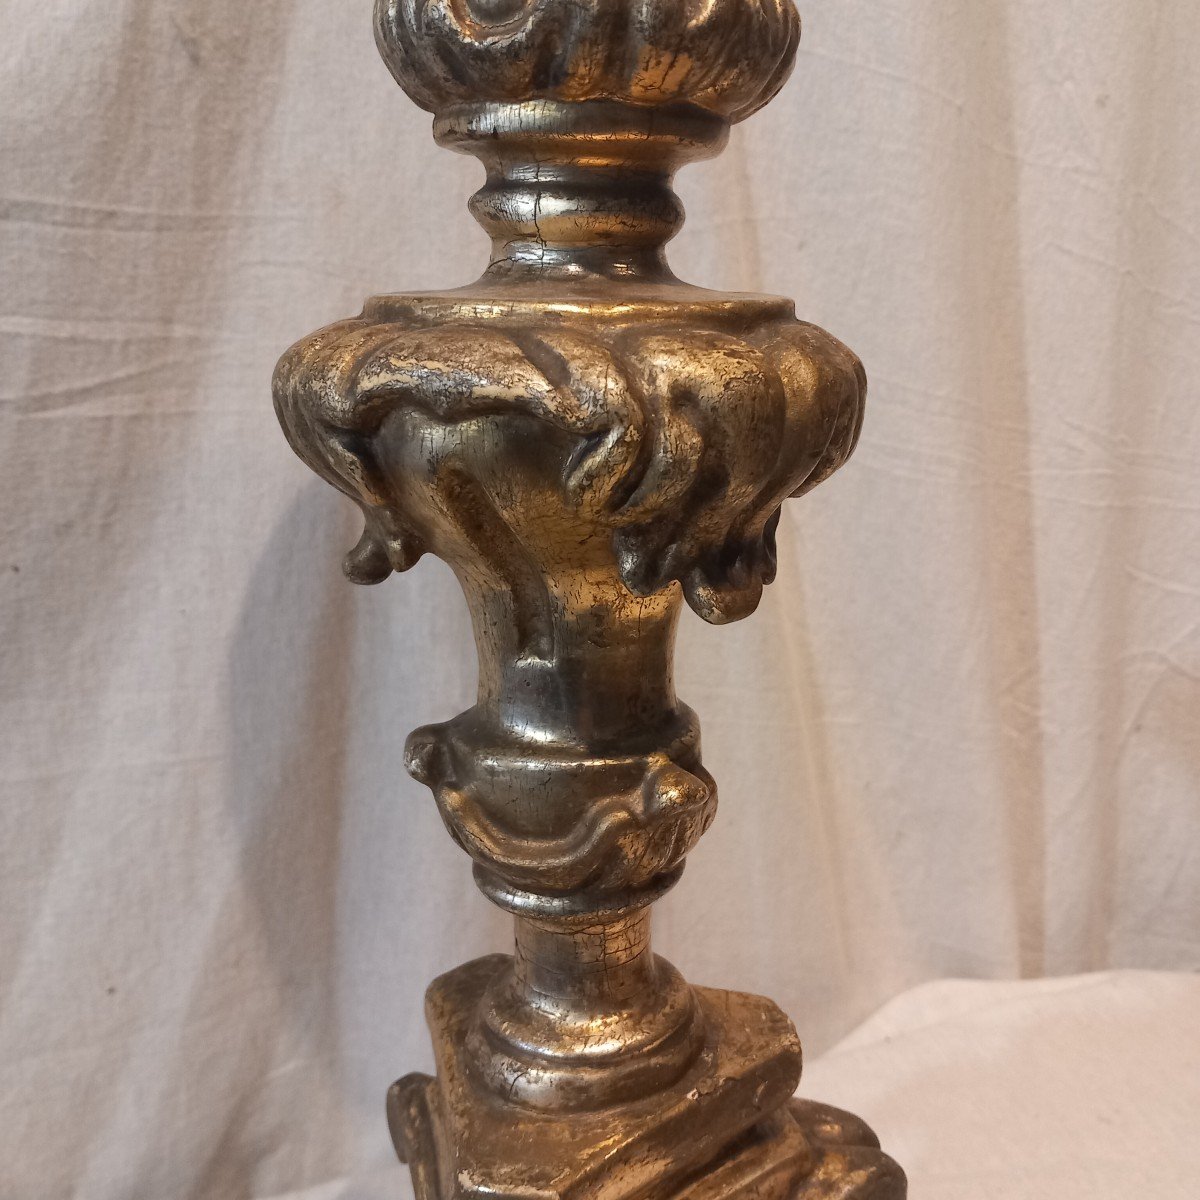 Candle Stick, Gilded Wood, Provence Early 18th Century.-photo-3